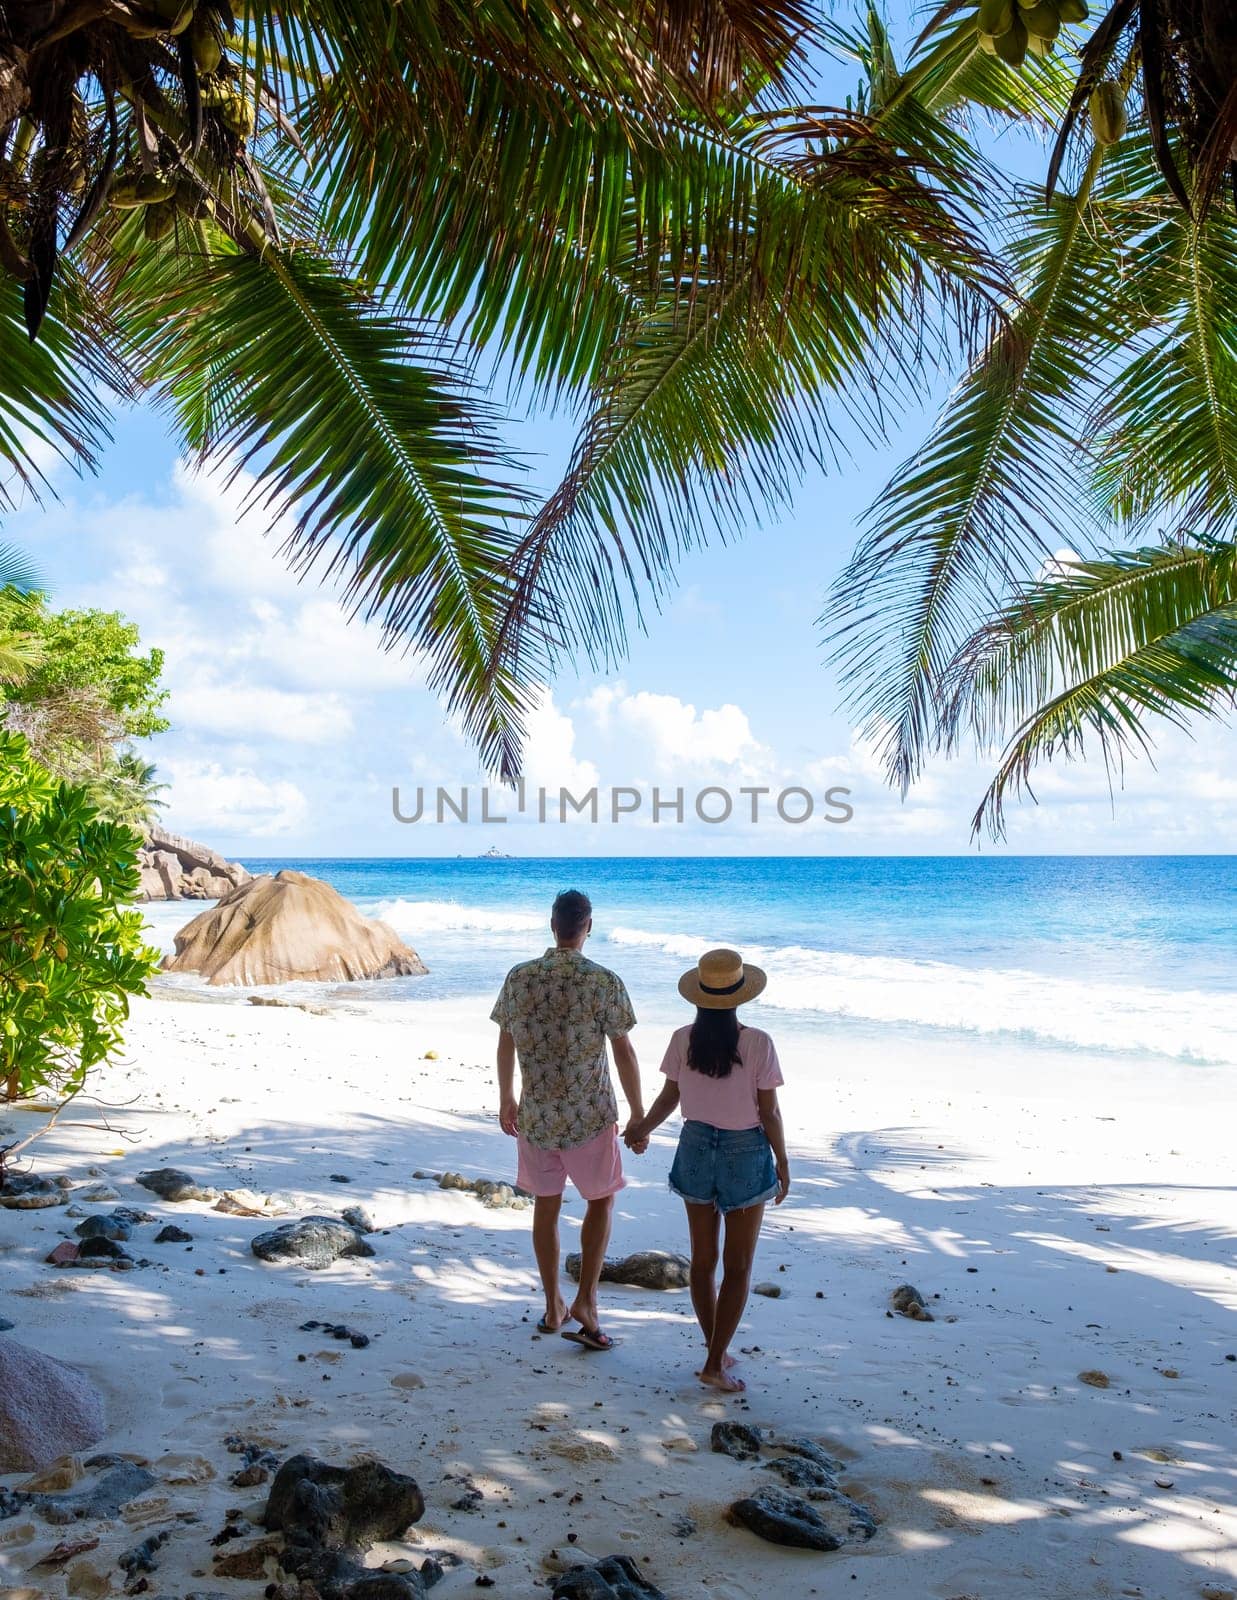 Anse Lazio Praslin Seychelles is a young couple of men and women on a tropical beach during a luxury vacation there. Tropical beach Anse Lazio Praslin Seychelles Islands